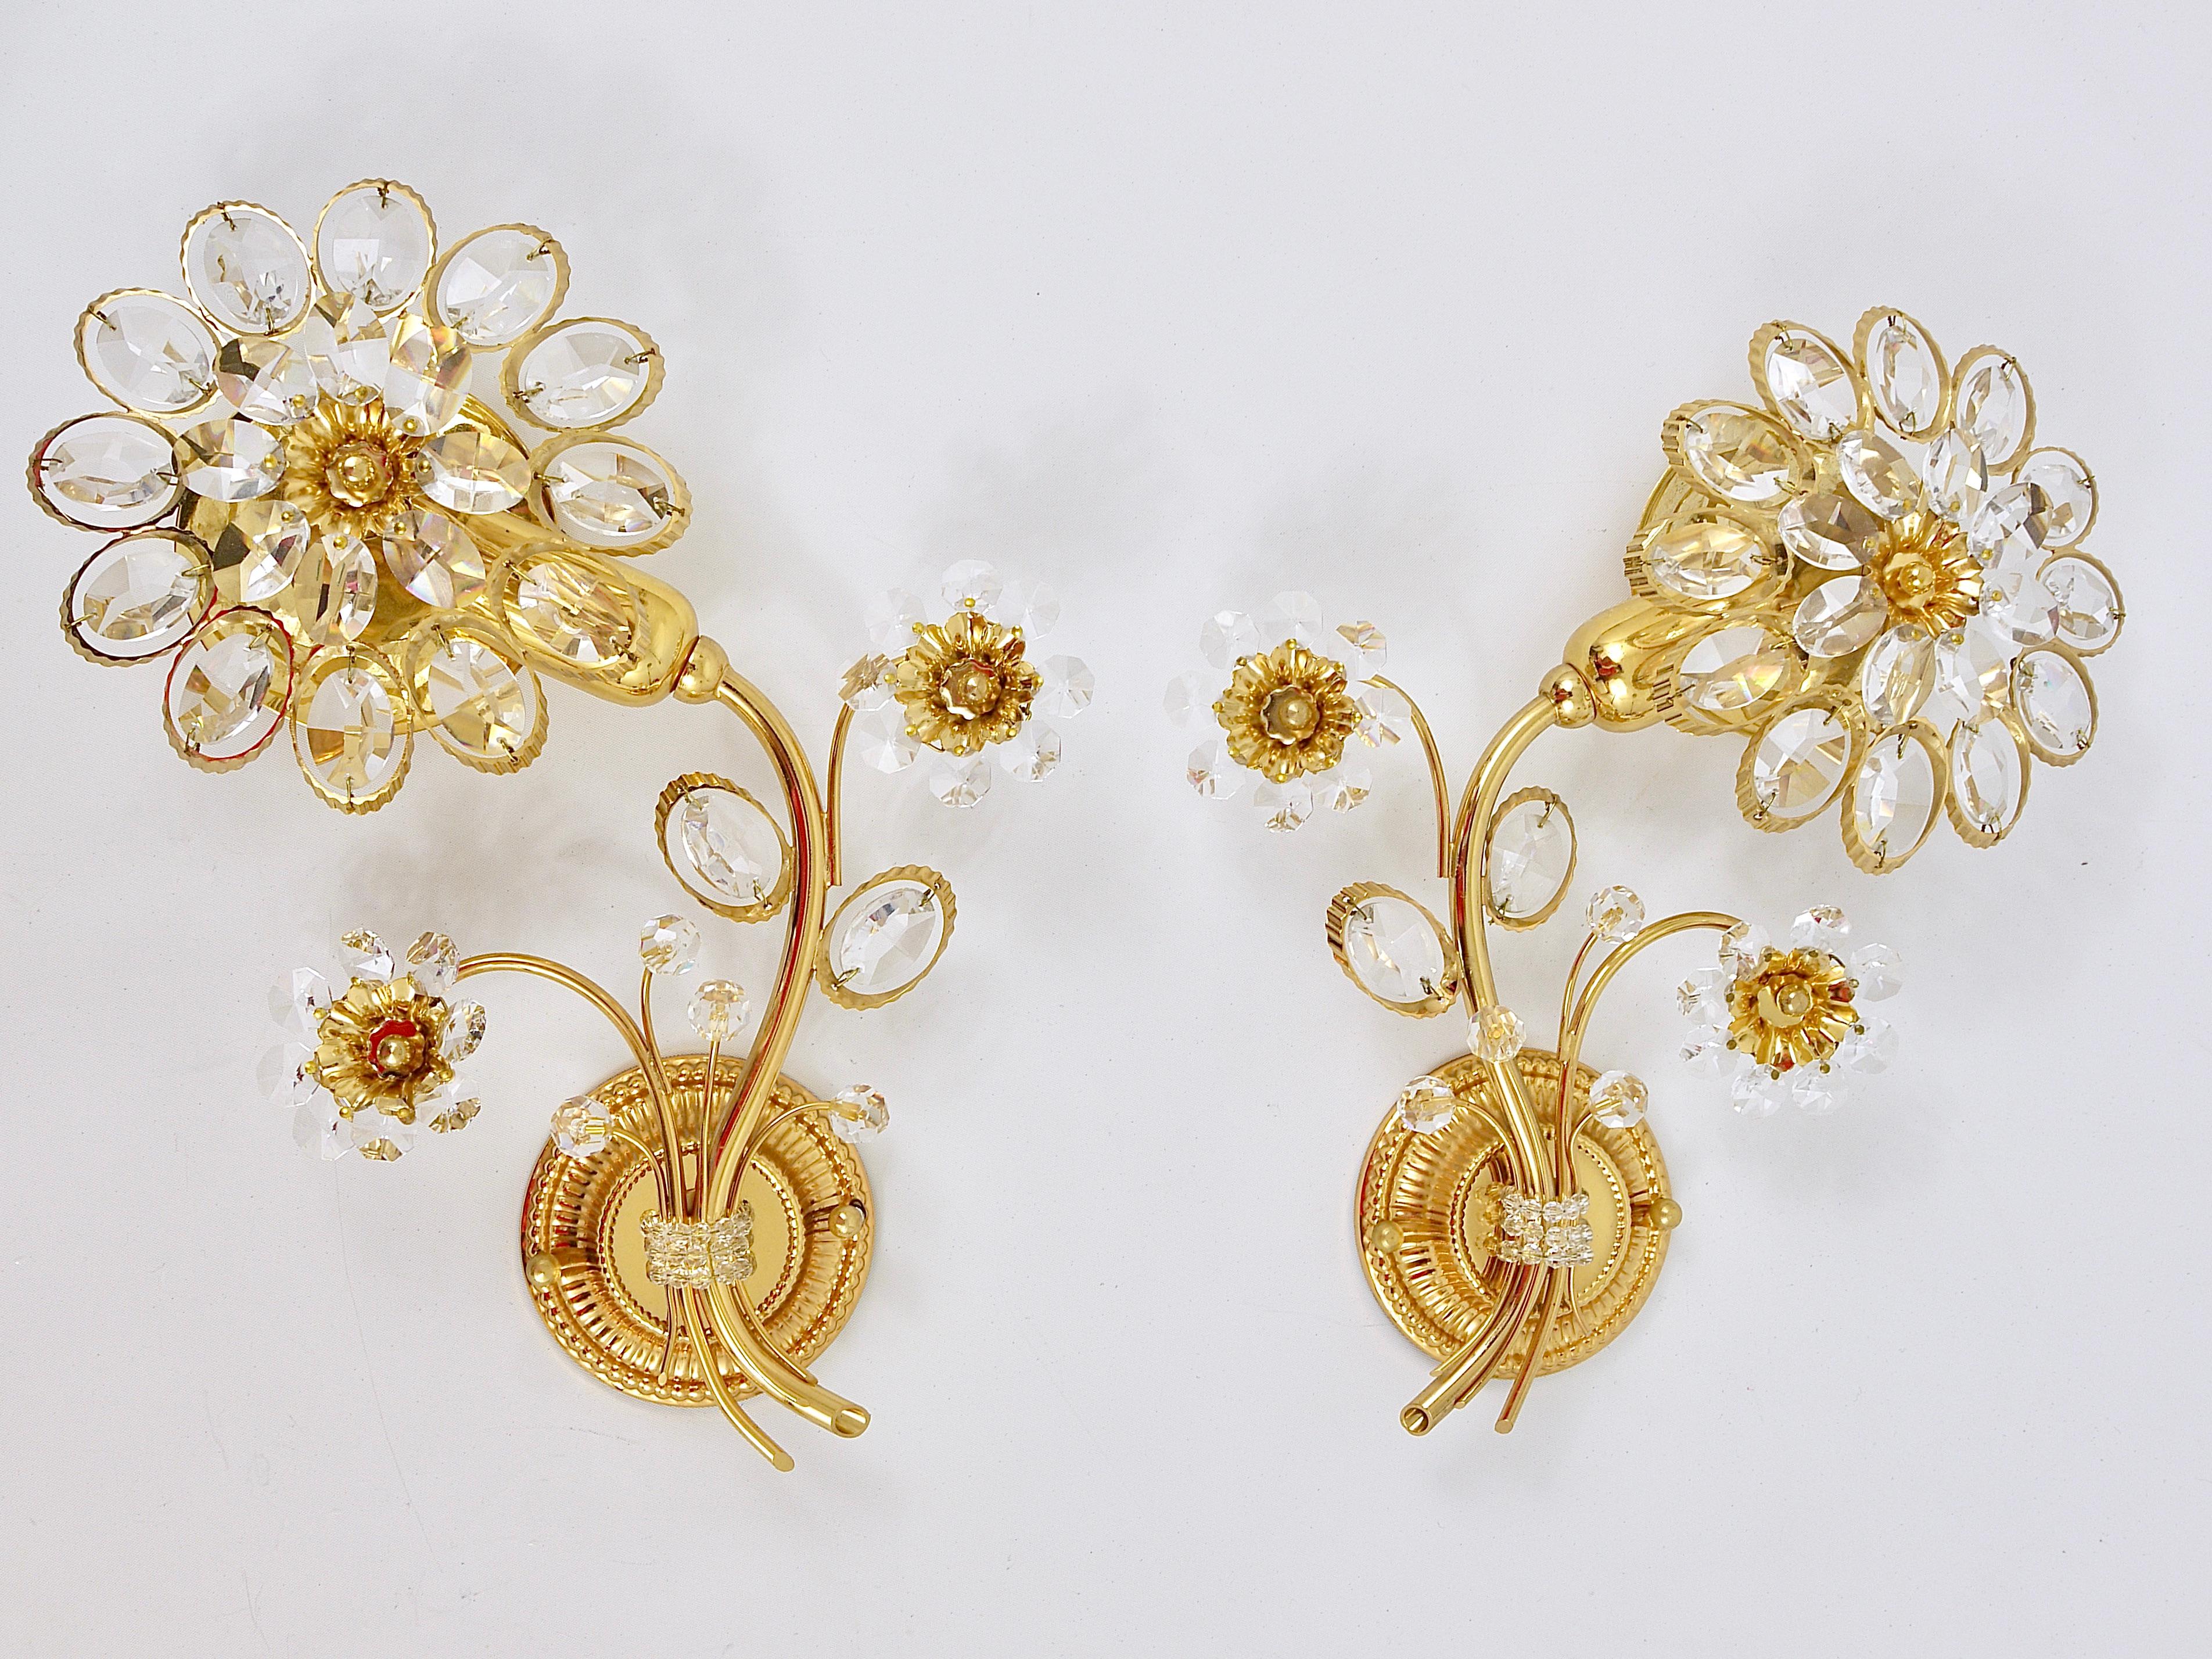 Pair of Palwa Gilt Brass Flower Wall Lights with Crystals, Germany, 1970s For Sale 2